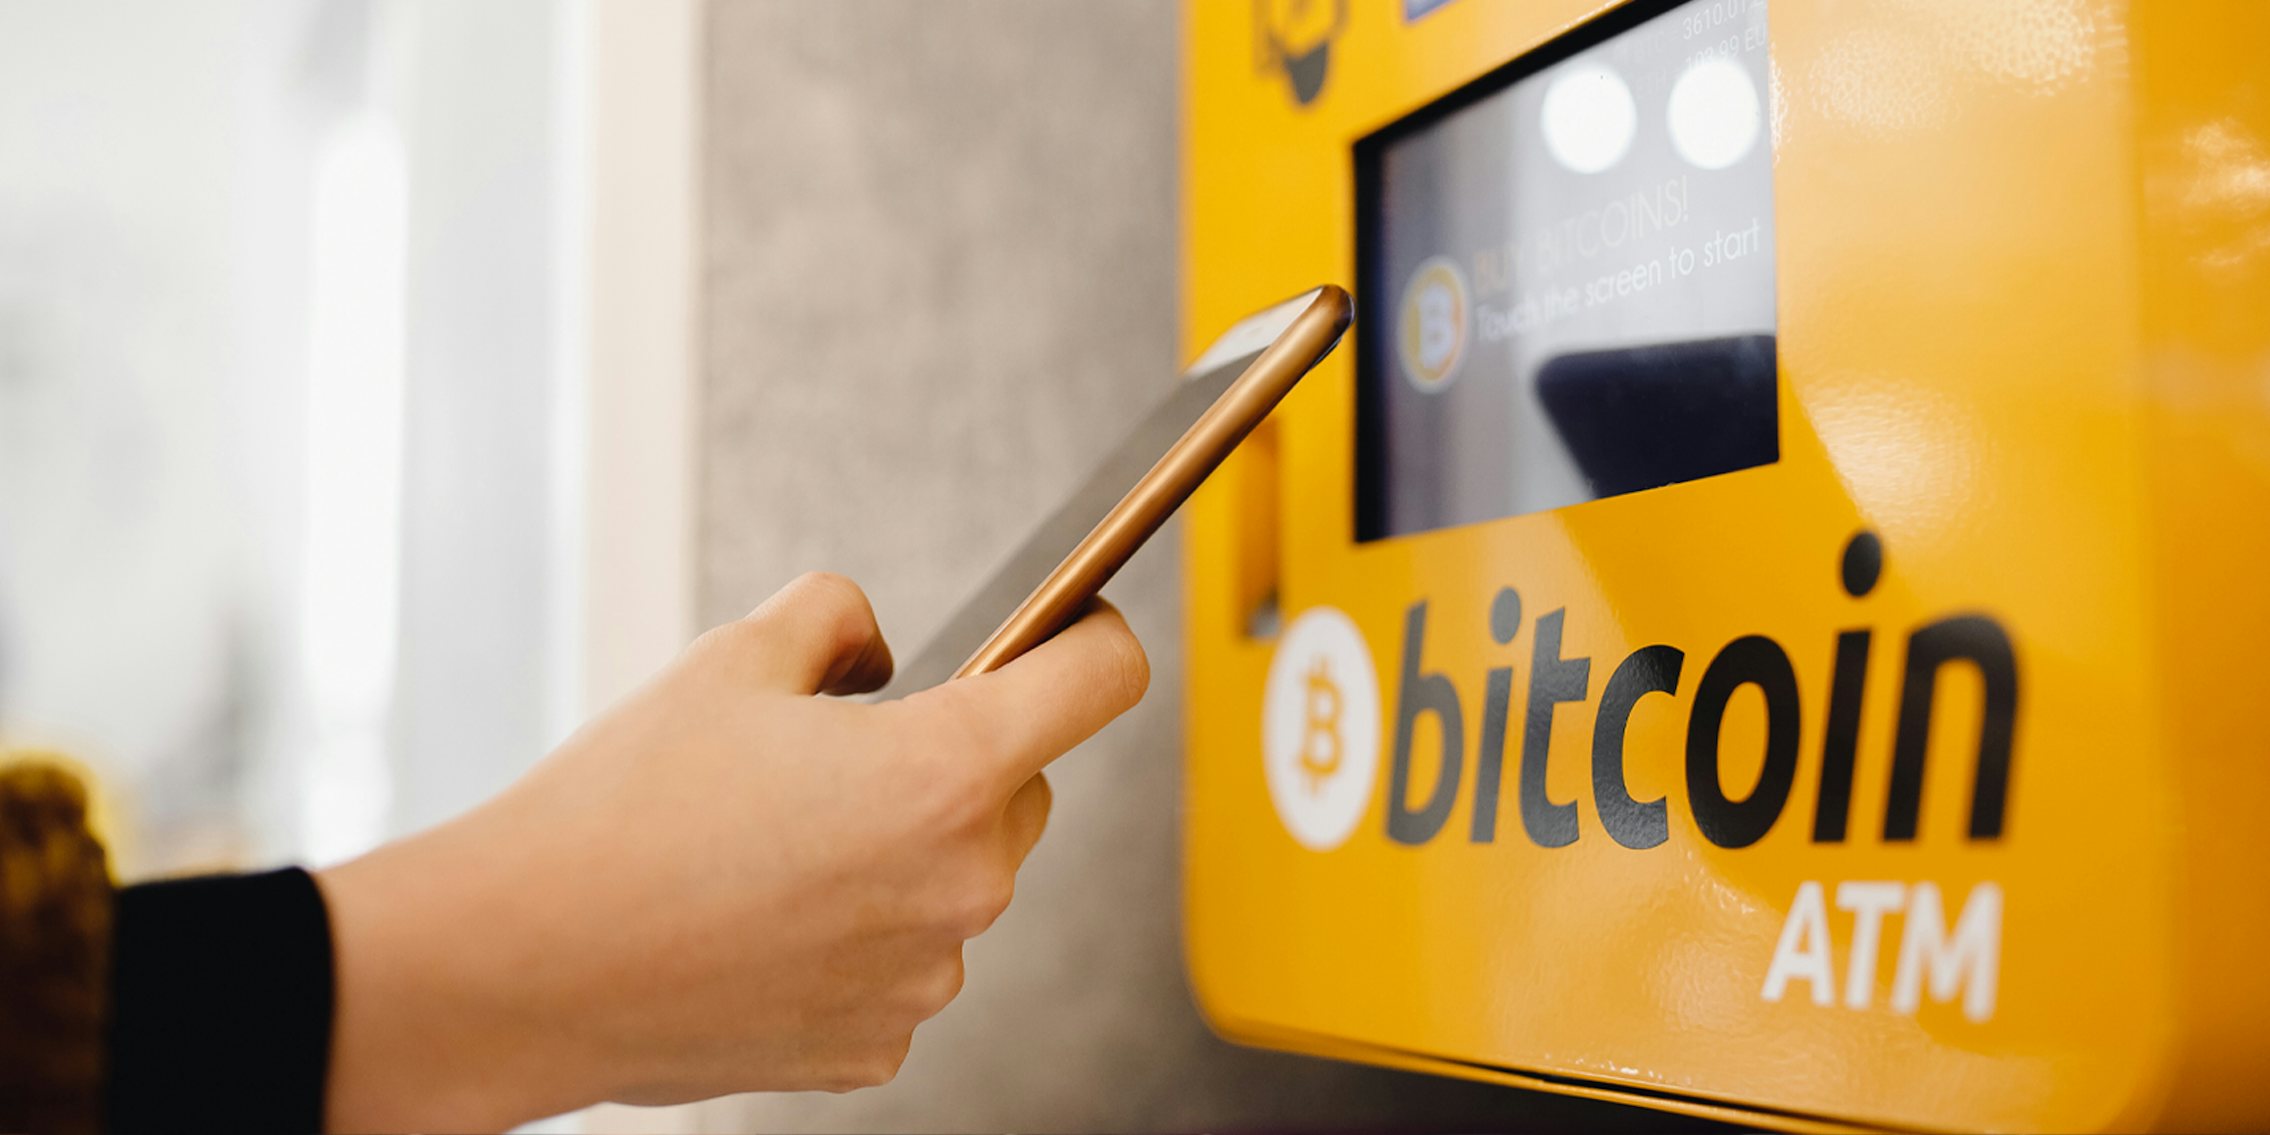 hand with phone up to Bitcoin ATM